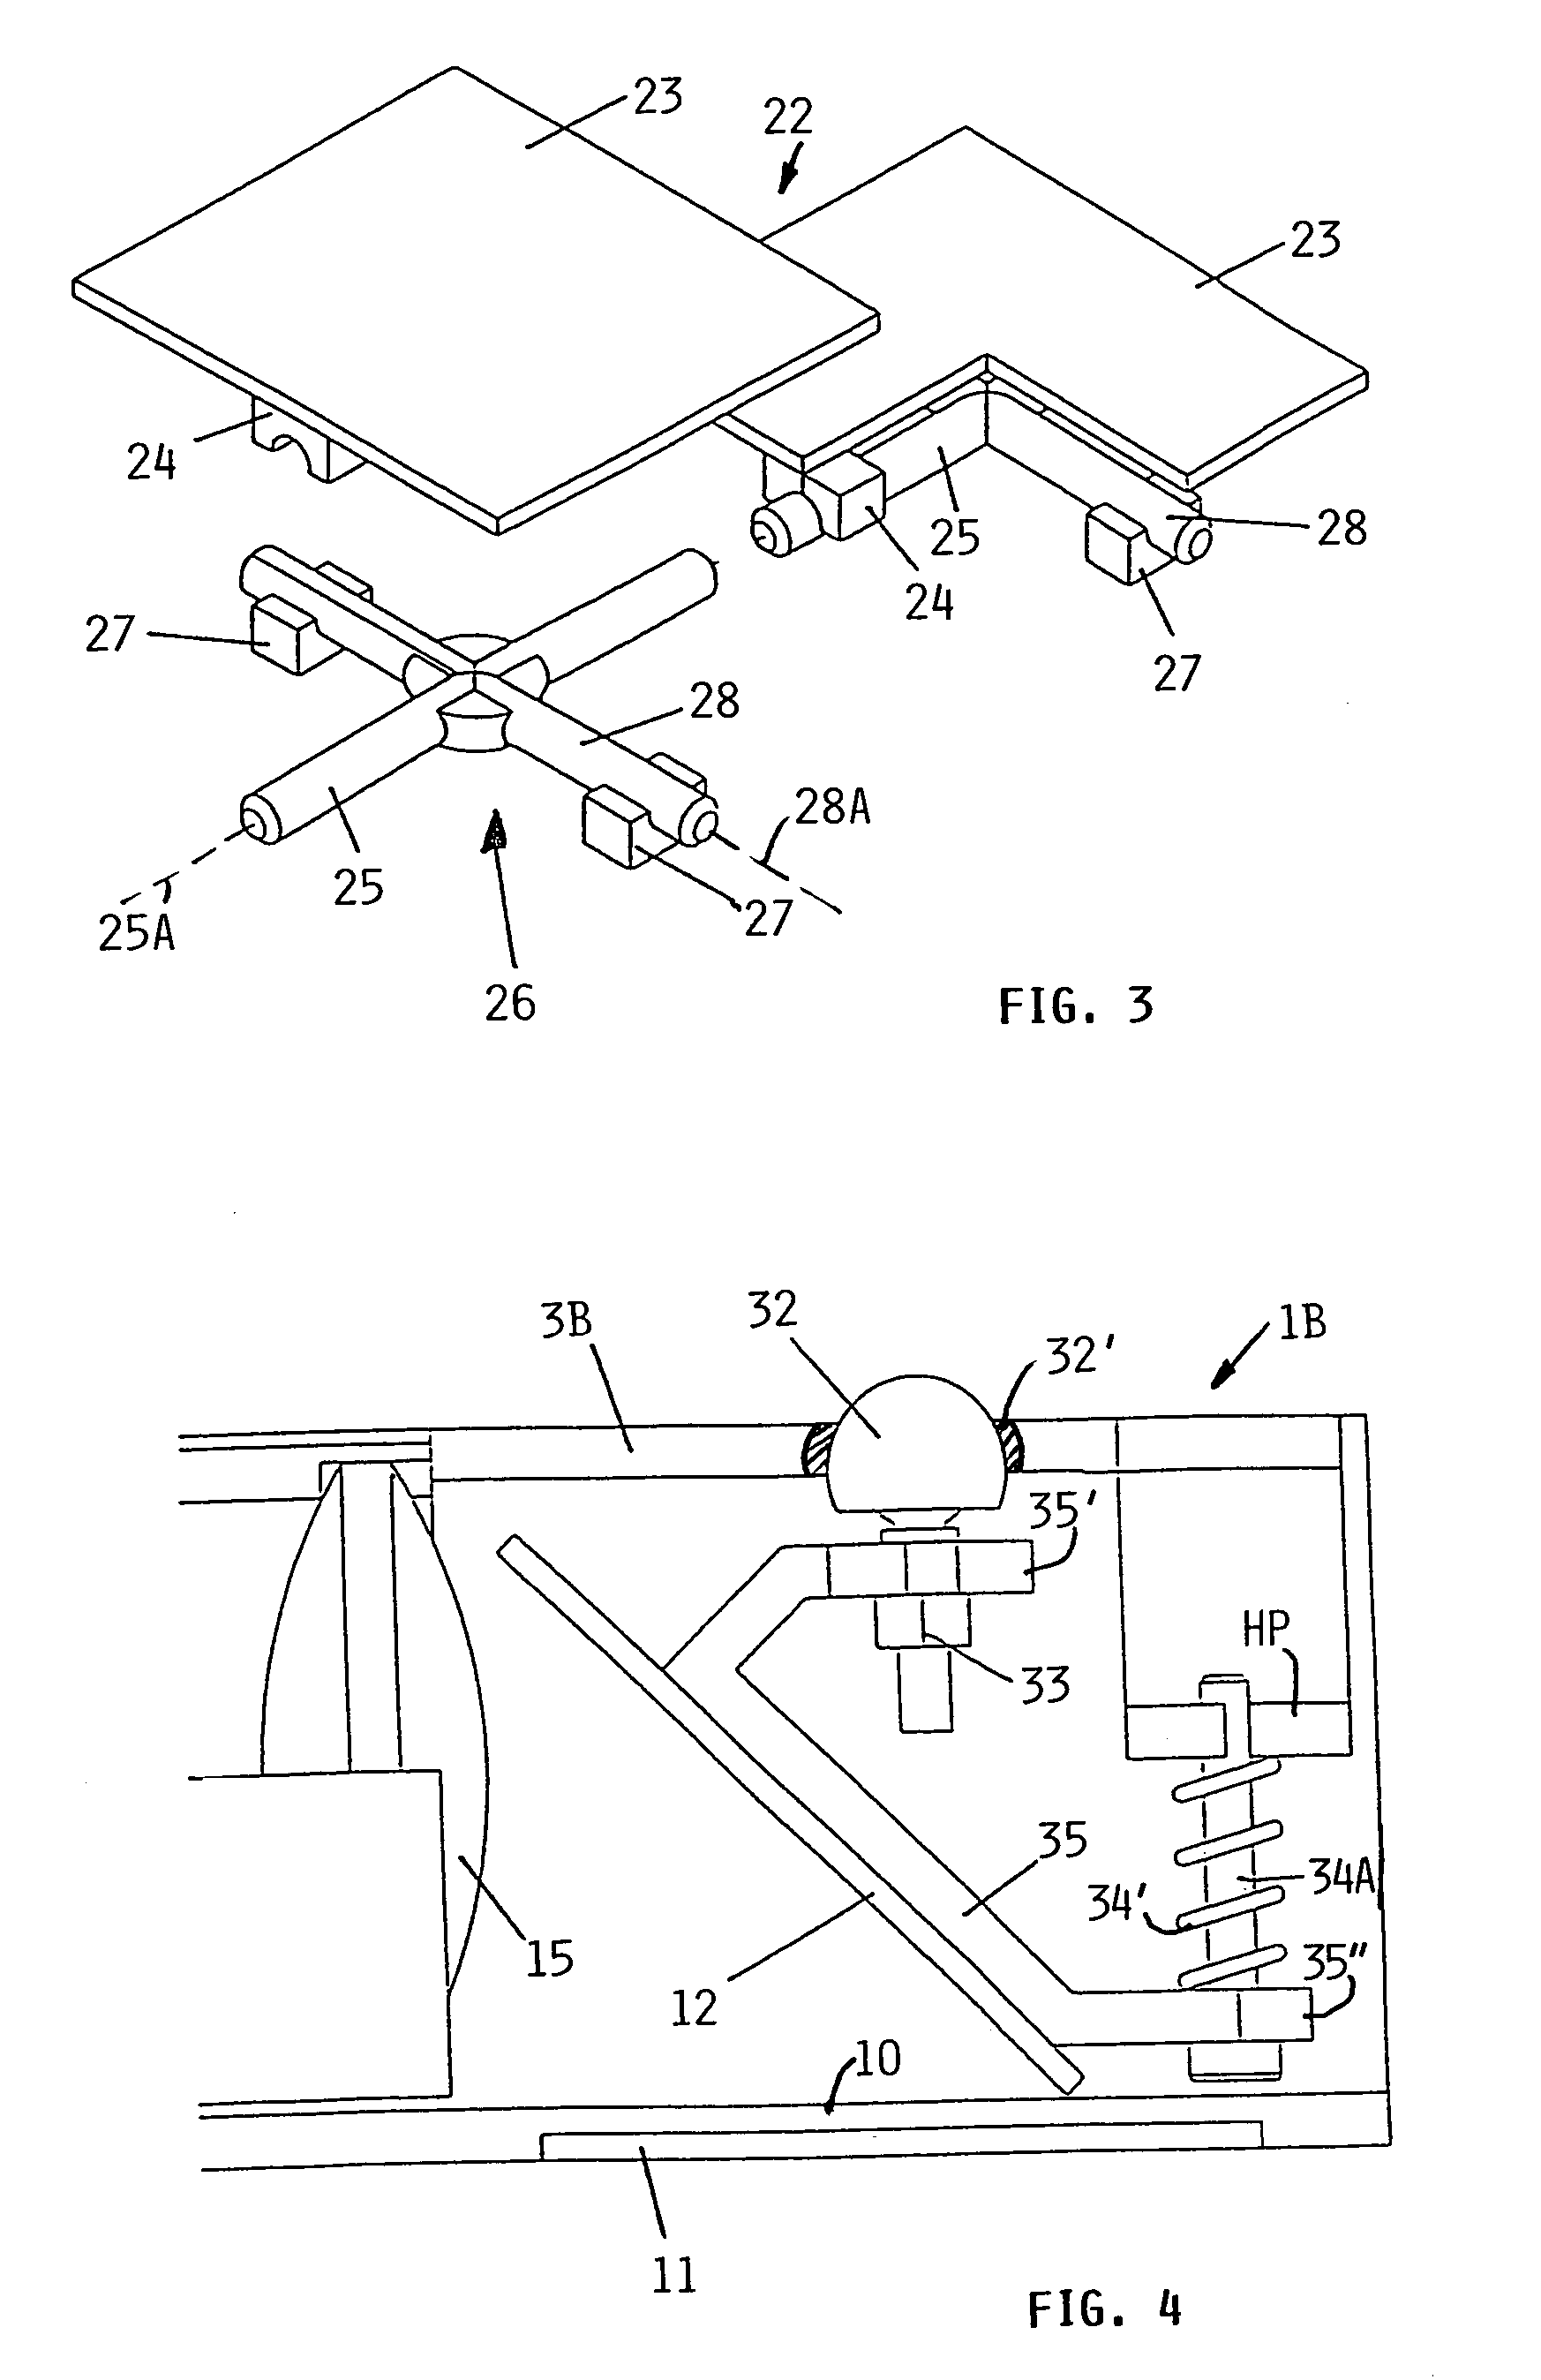 Reading lamp for aircraft cabins